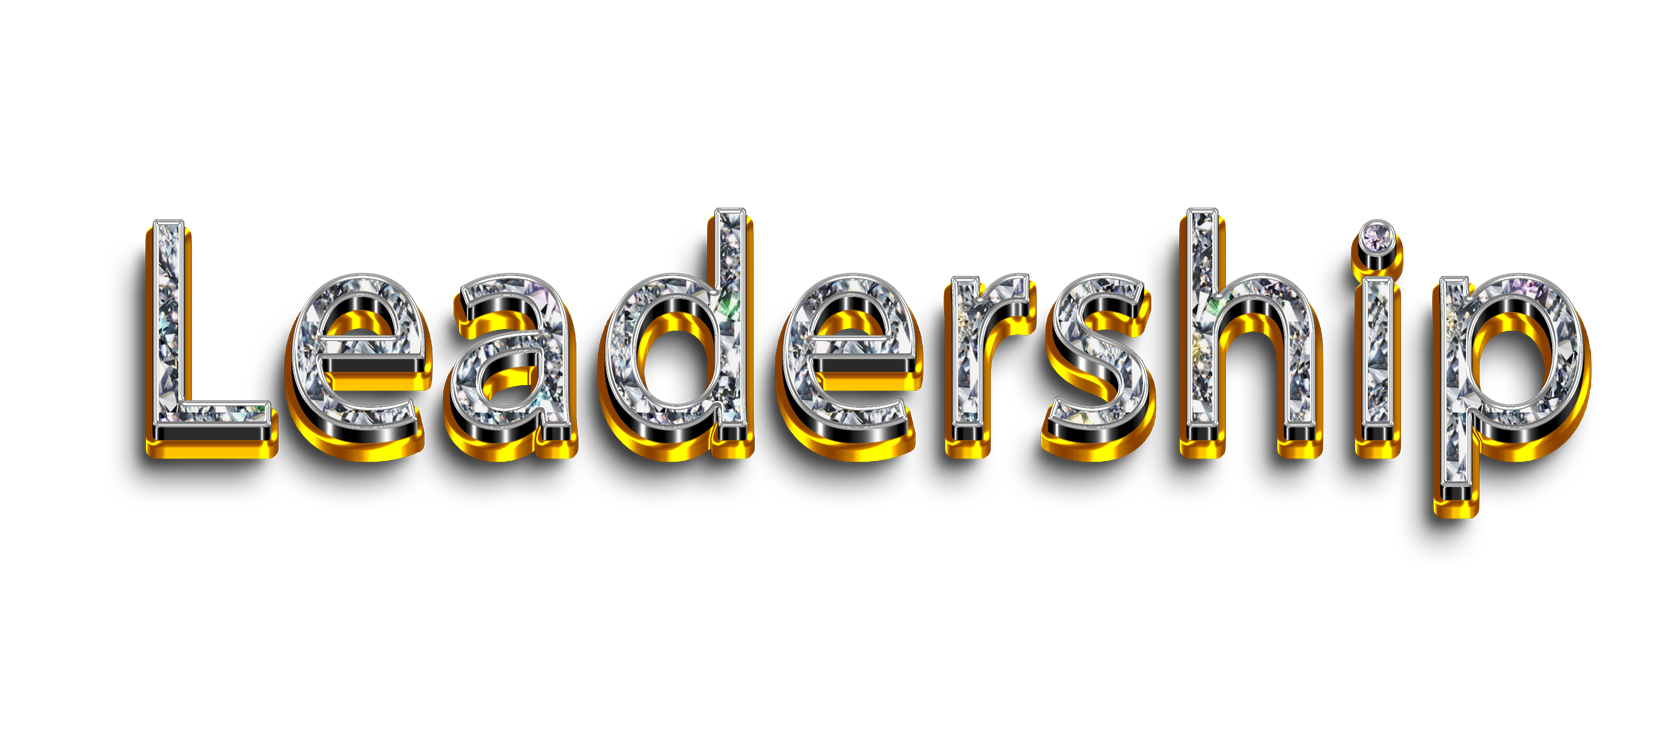 Leadership png, word Leadership png, Leadership word png, Leadership text png, Leadership letters png, Leadership word diamond gold text typography PNG images transparent background